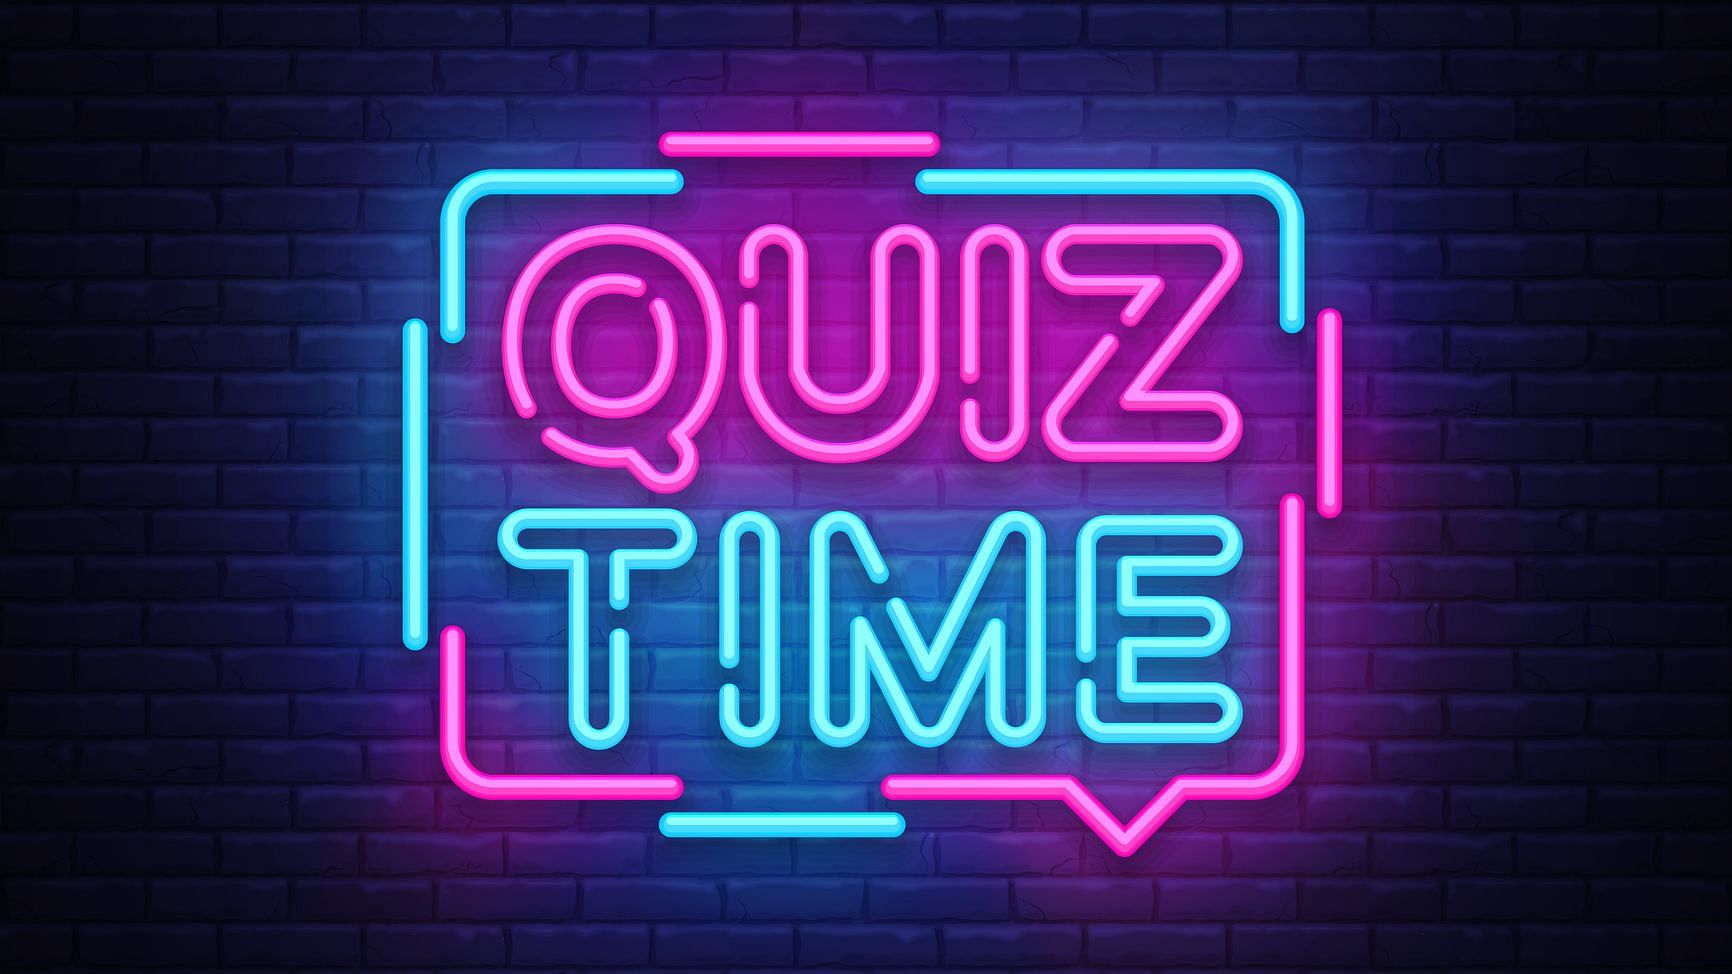 Amazon Quiz Questions and Answers For 29 November